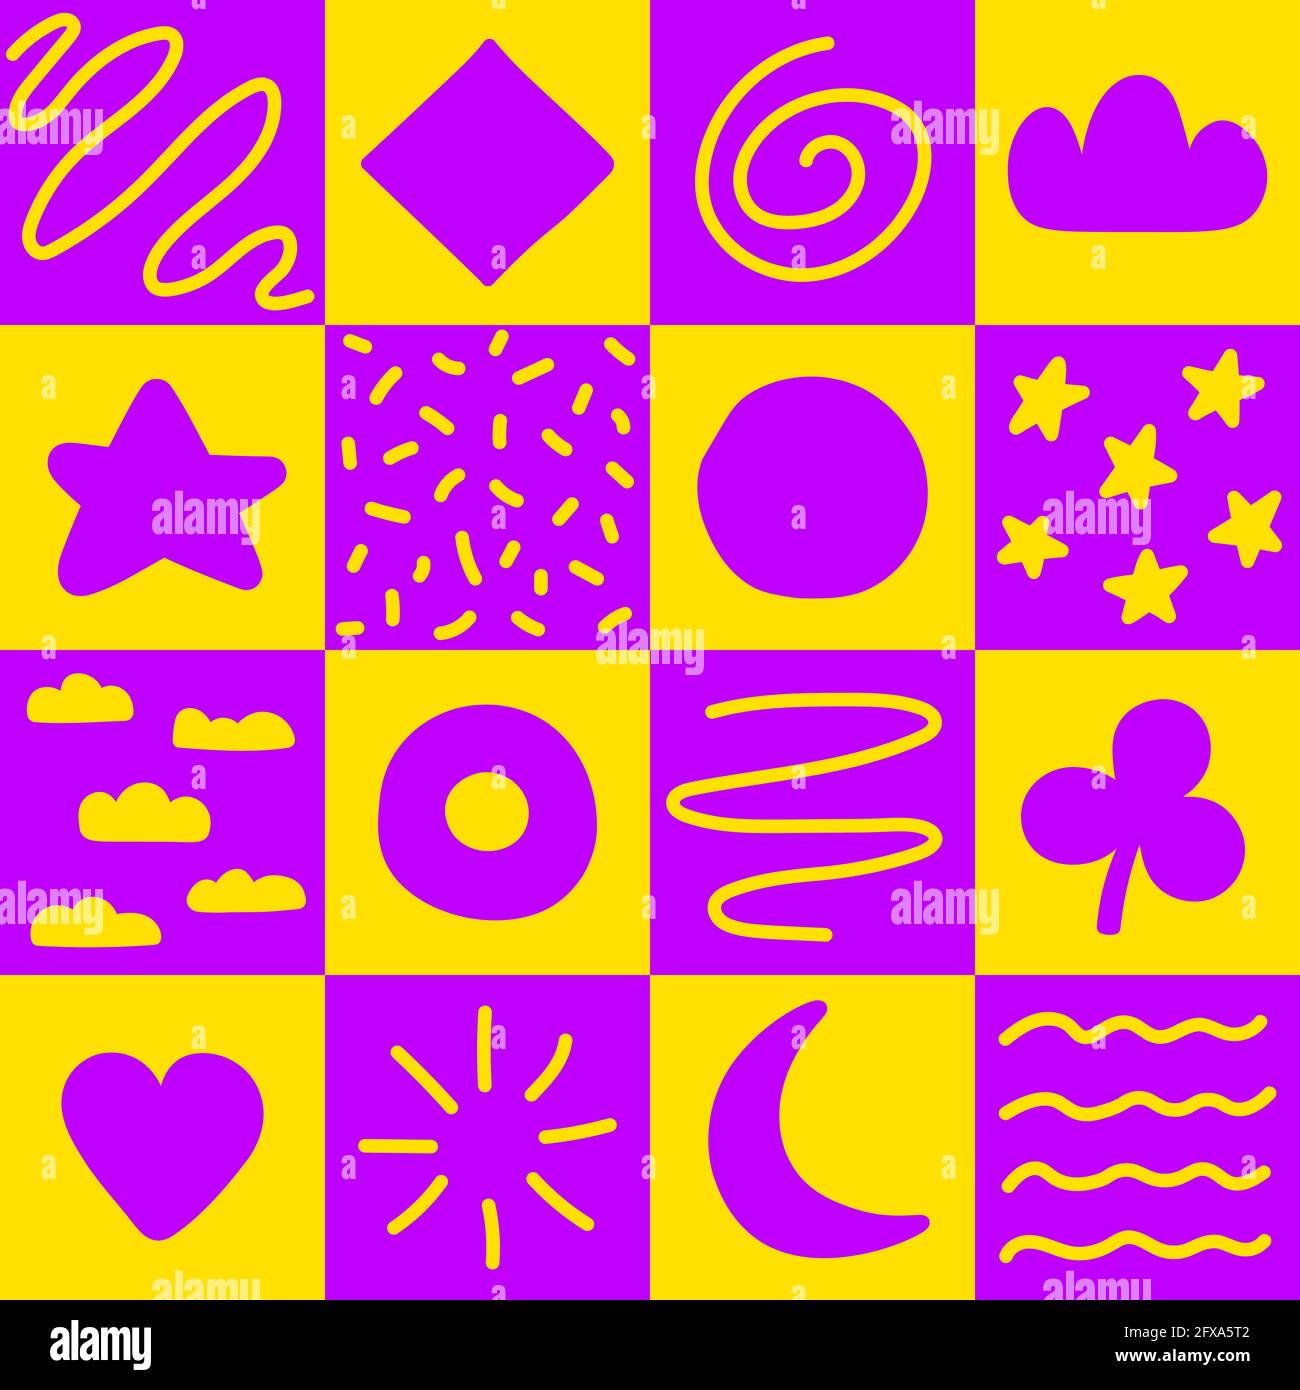 Bright hand drawn seamless pattern in purple and yellow colors. Modern trendy vector illustration of simple geometric shapes, doodles and elements Stock Vector